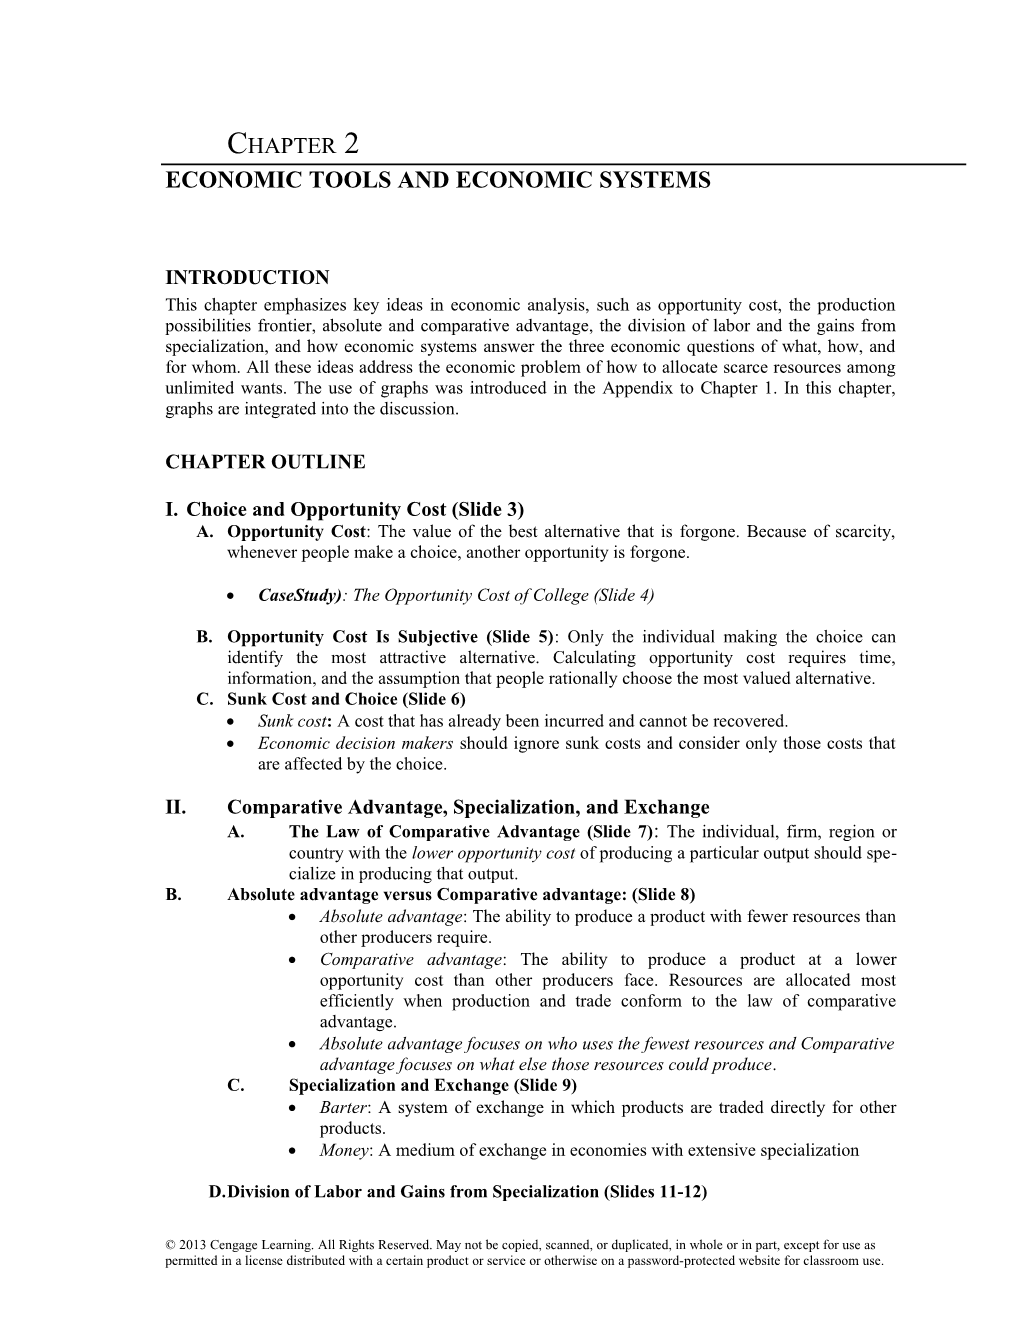 Chapter 2 Economic Tools and Economic Systems 27